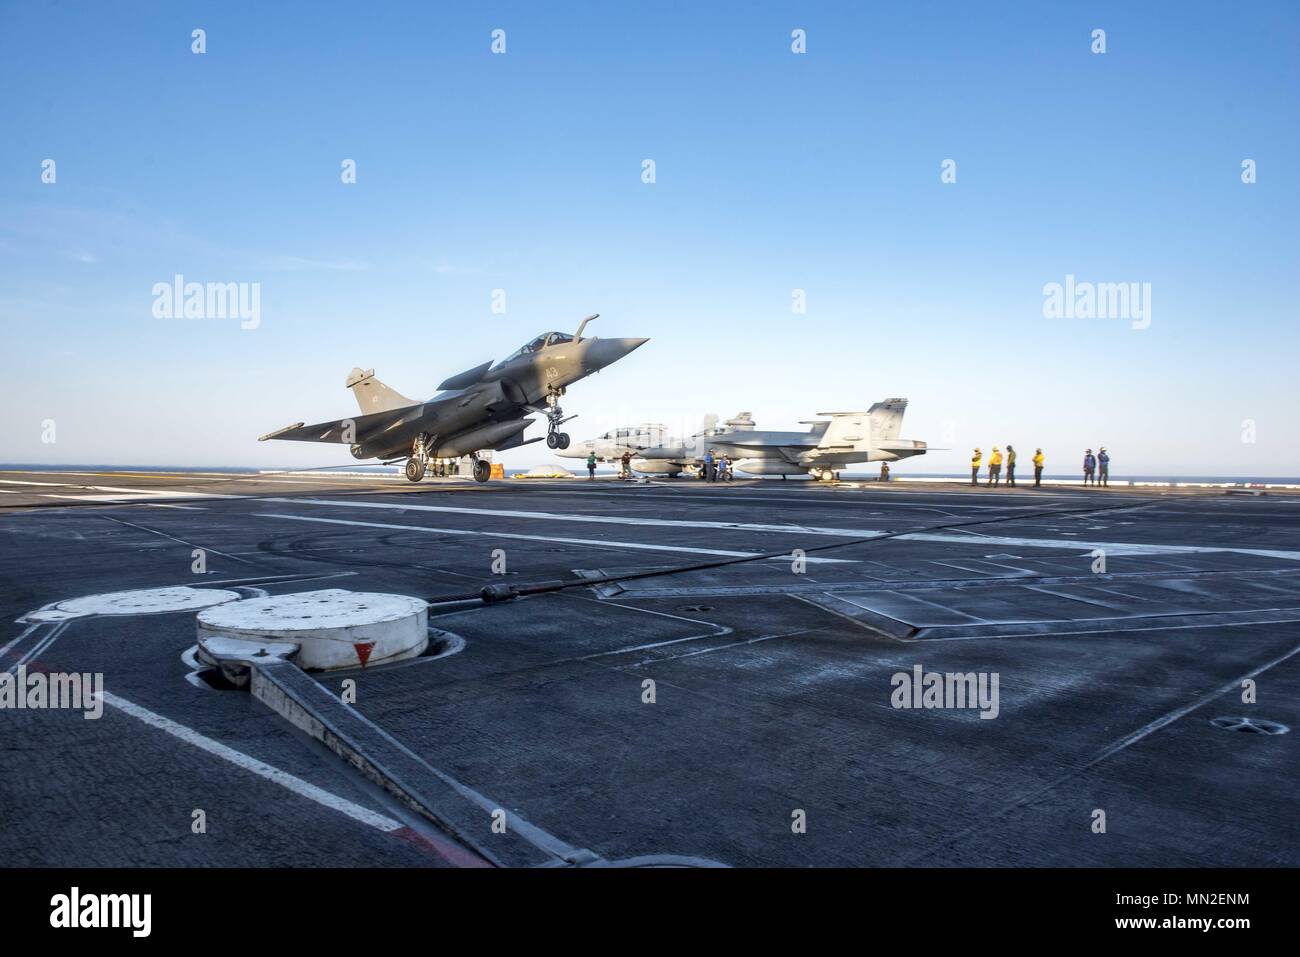 180510-N-UV609-0539 ATLANTIC OCEAN (May 10, 2018) A Rafale Marine attached to squadron 17F of the French navy lands on the flight deck of the aircraft carrier USS George H.W. Bush (CVN 77), May 10, 2018. GHWB is underway in the Atlantic Ocean conducting carrier air wing exercises with the French navy to strengthen partnerships and deepen interoperability between the two nations' naval forces. (U.S. Navy photo by Mass Communication Specialist 2nd Class David Mora Jr.). () Stock Photo